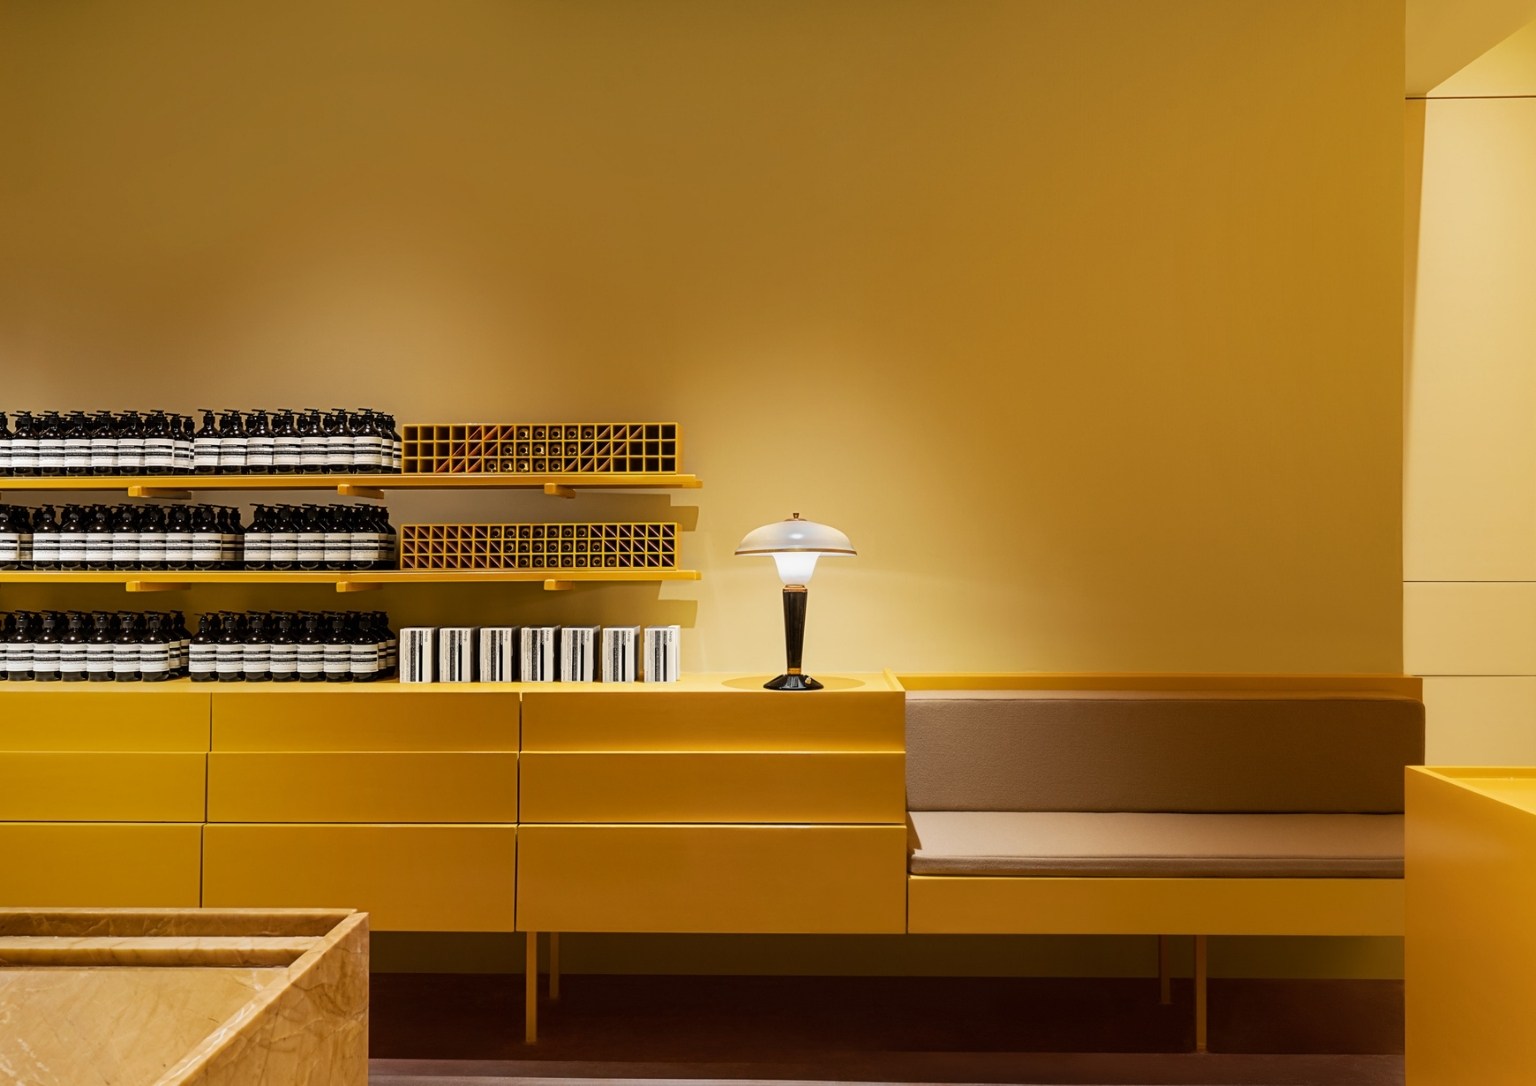 Aesop store's interior showcases their products on minimalist cabinetry.